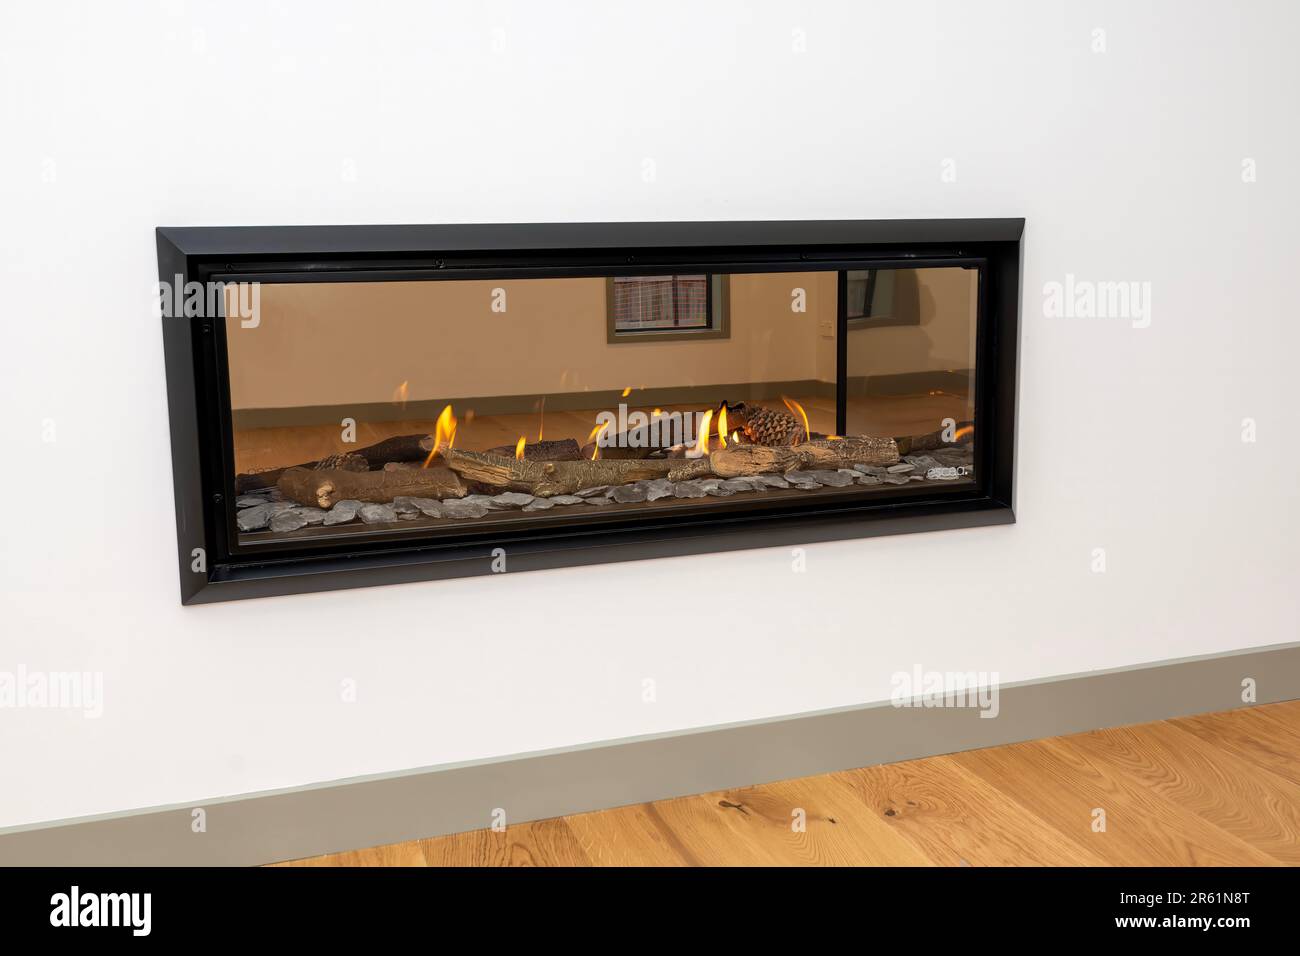 A modern double sided fireplace burning brightly with a warm, orange flame Stock Photo